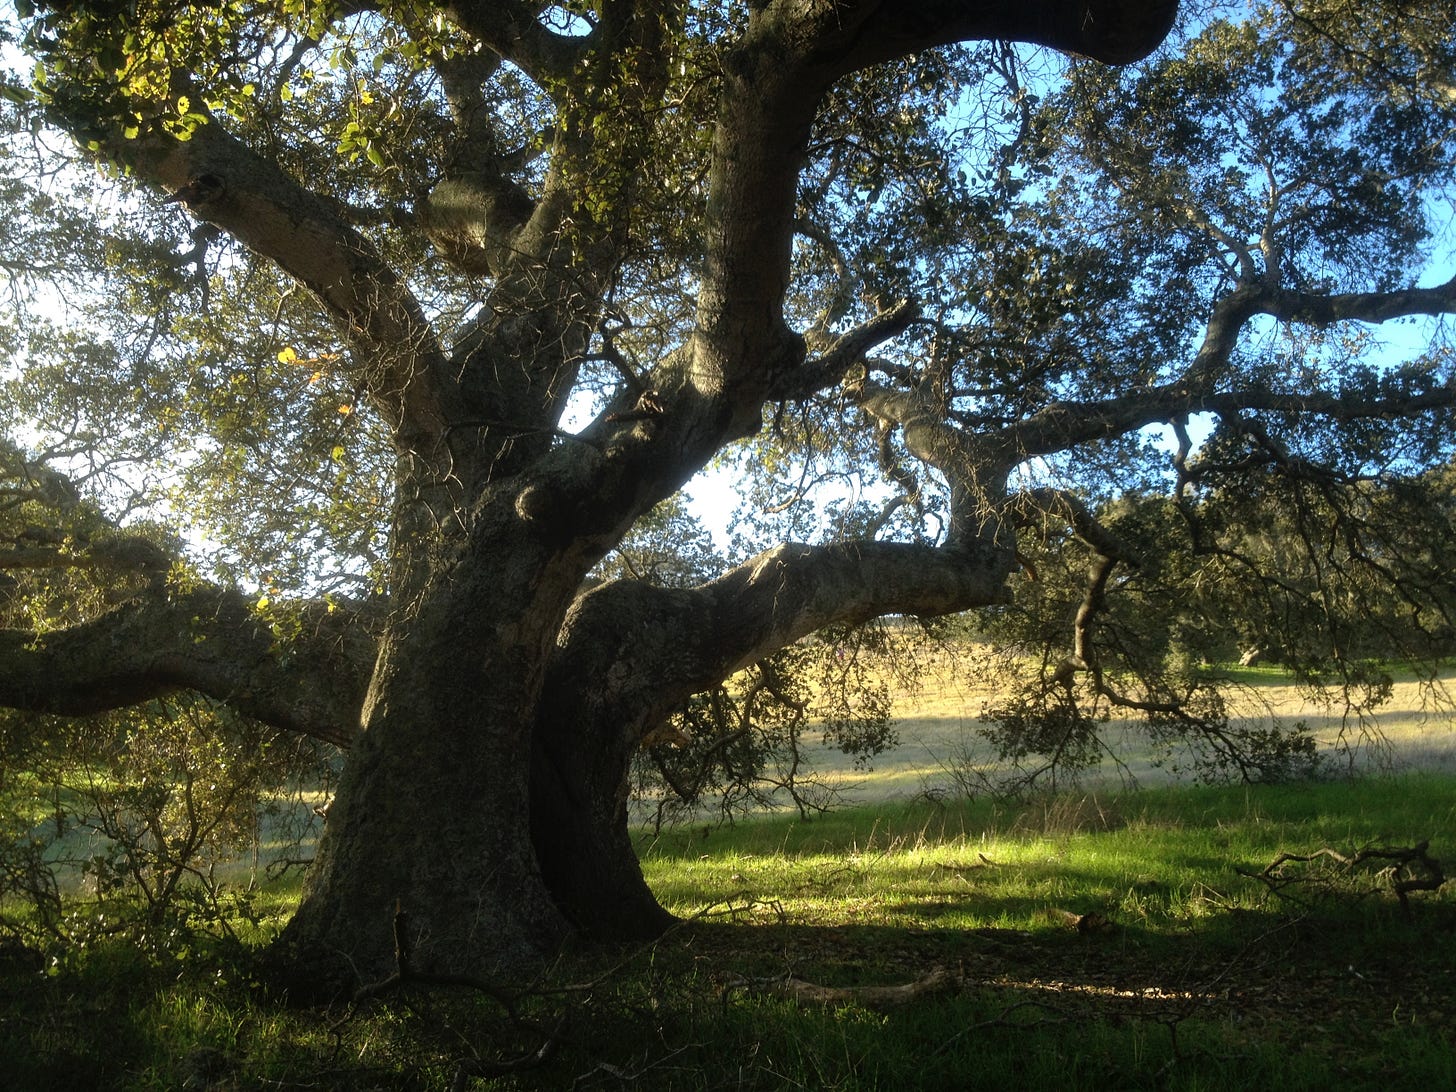 Large spreading live oak tree in the long shadows of late afternoon